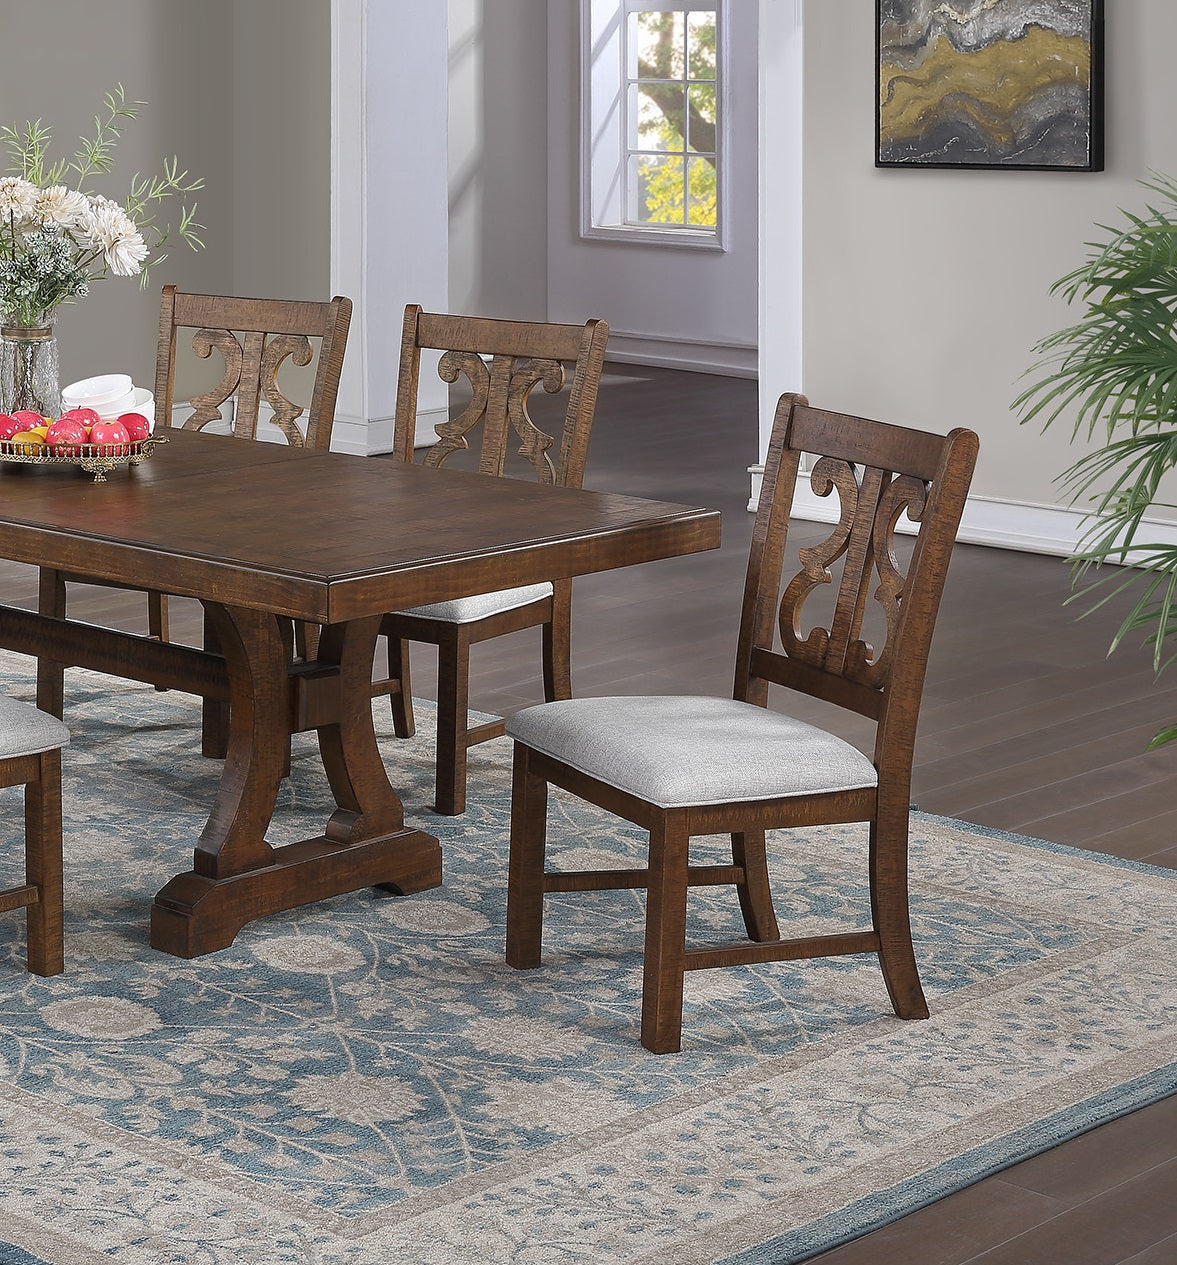 Classic Crafted Design Dining Room, Set of 2 Chairs Wooden Cushion Seat Distressed Paint Chairs